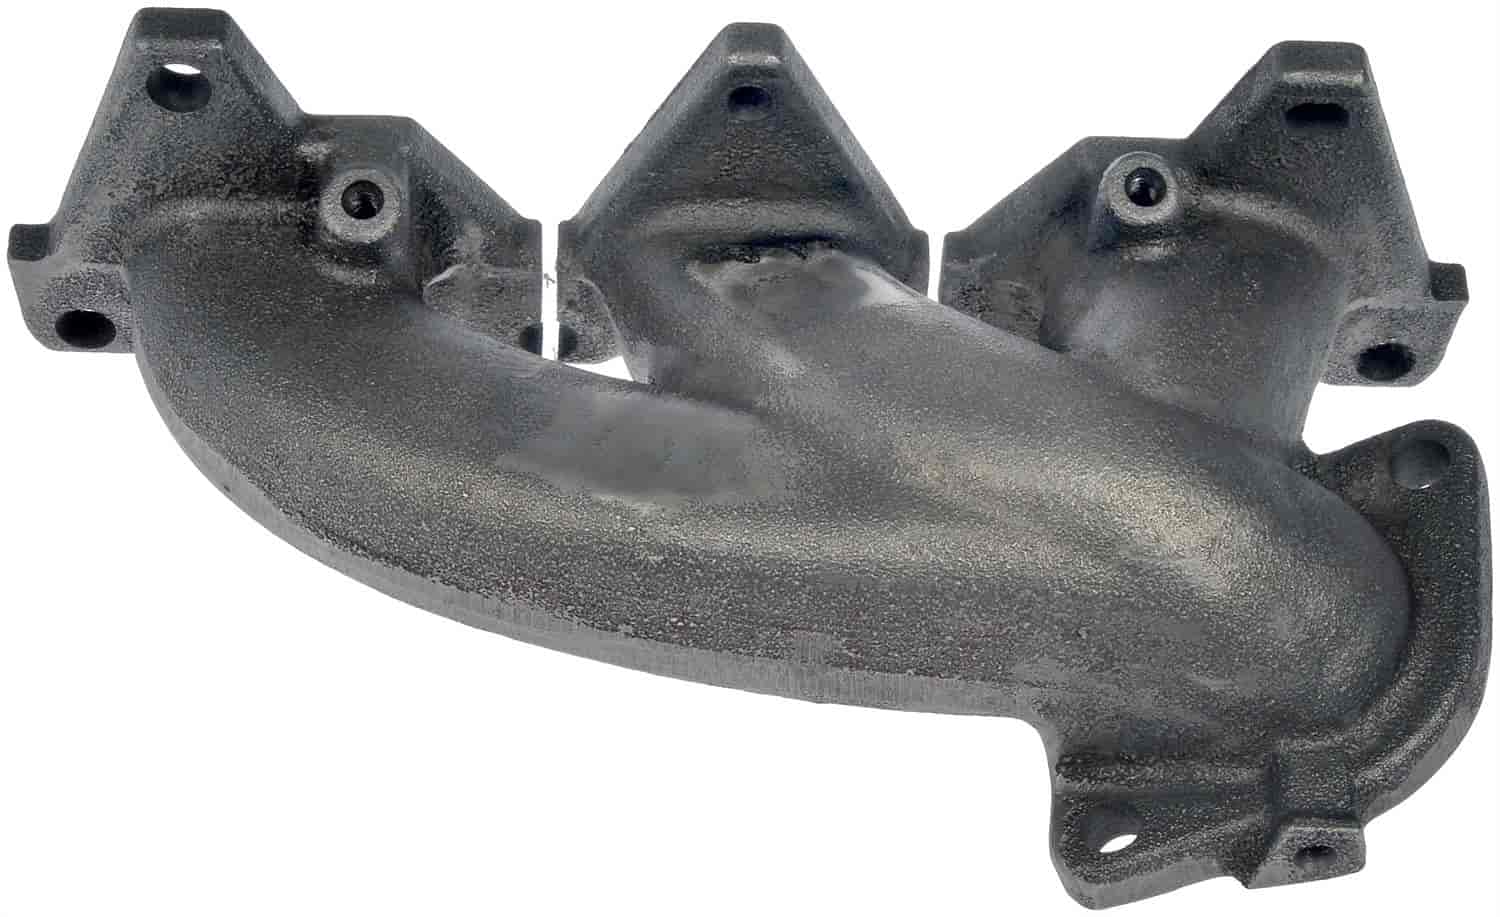 Exhaust Manifold Kit - Includes Required Gaskets And